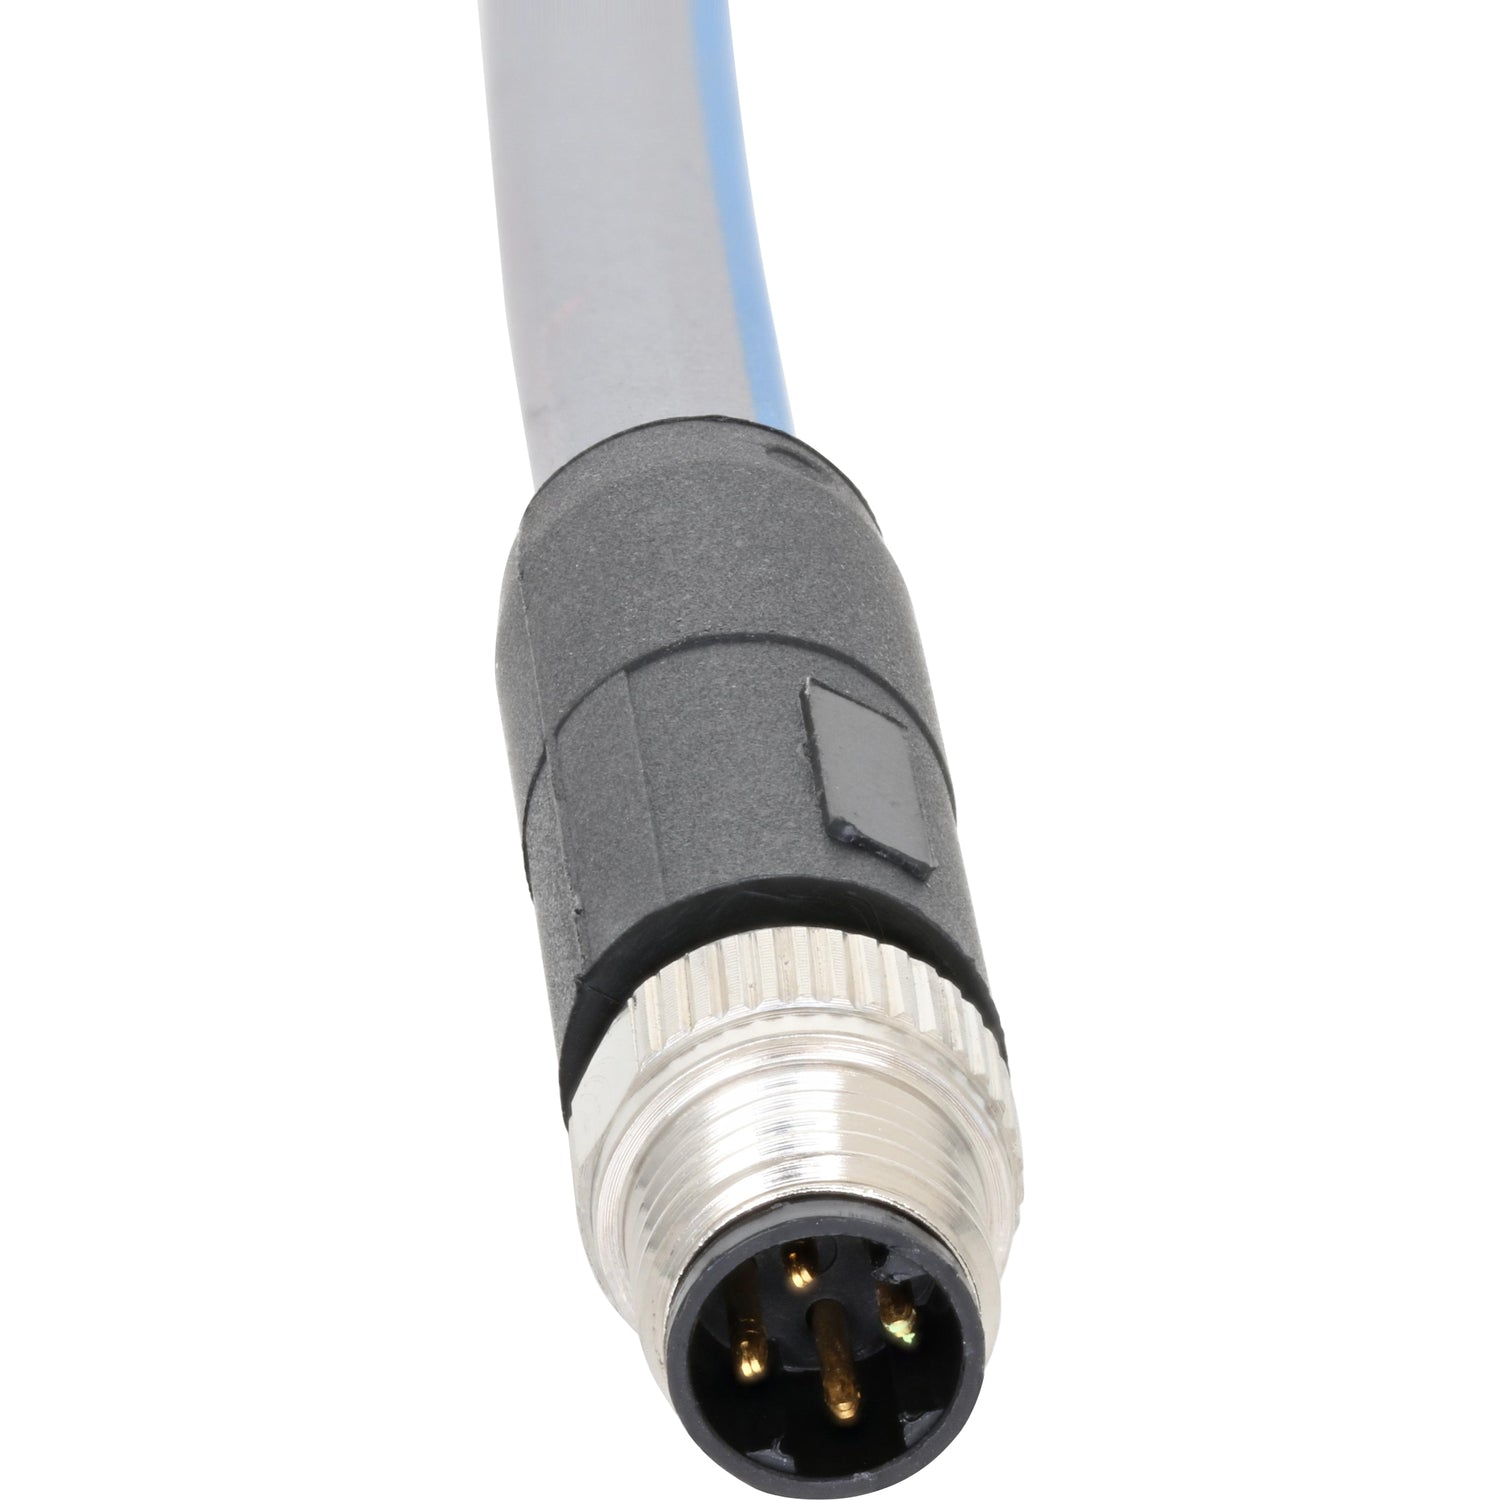 Blue and grey connecting cable with nickel plated four pin male connector on white background. 